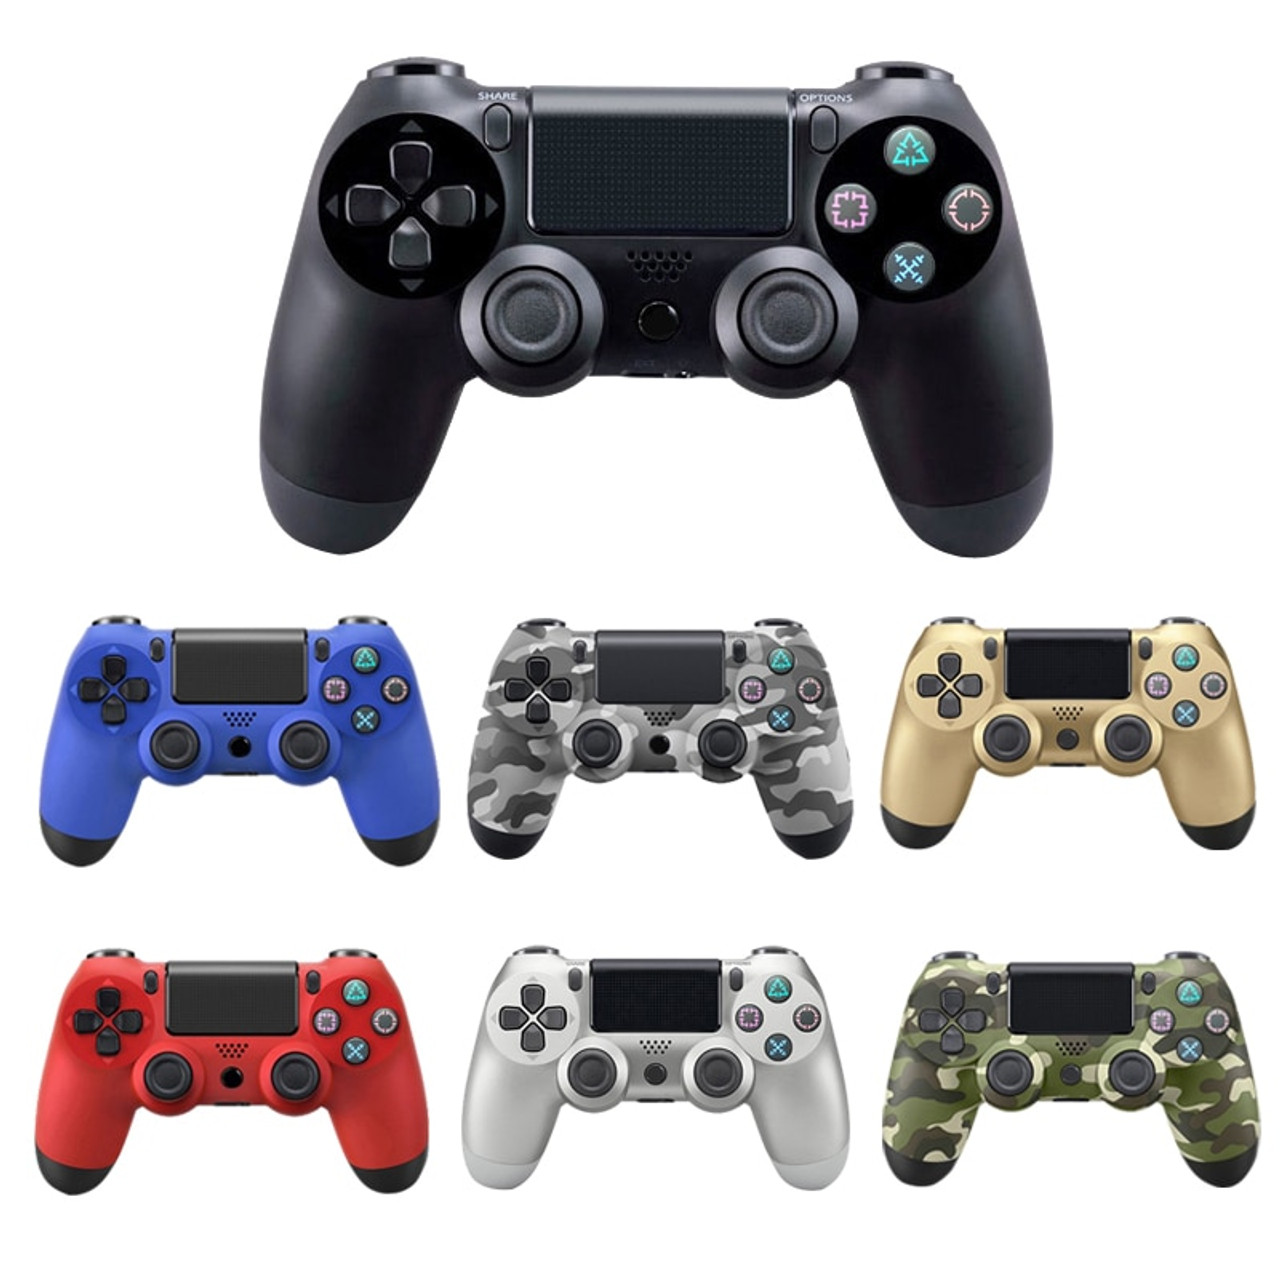 playstation 4 controller ps3